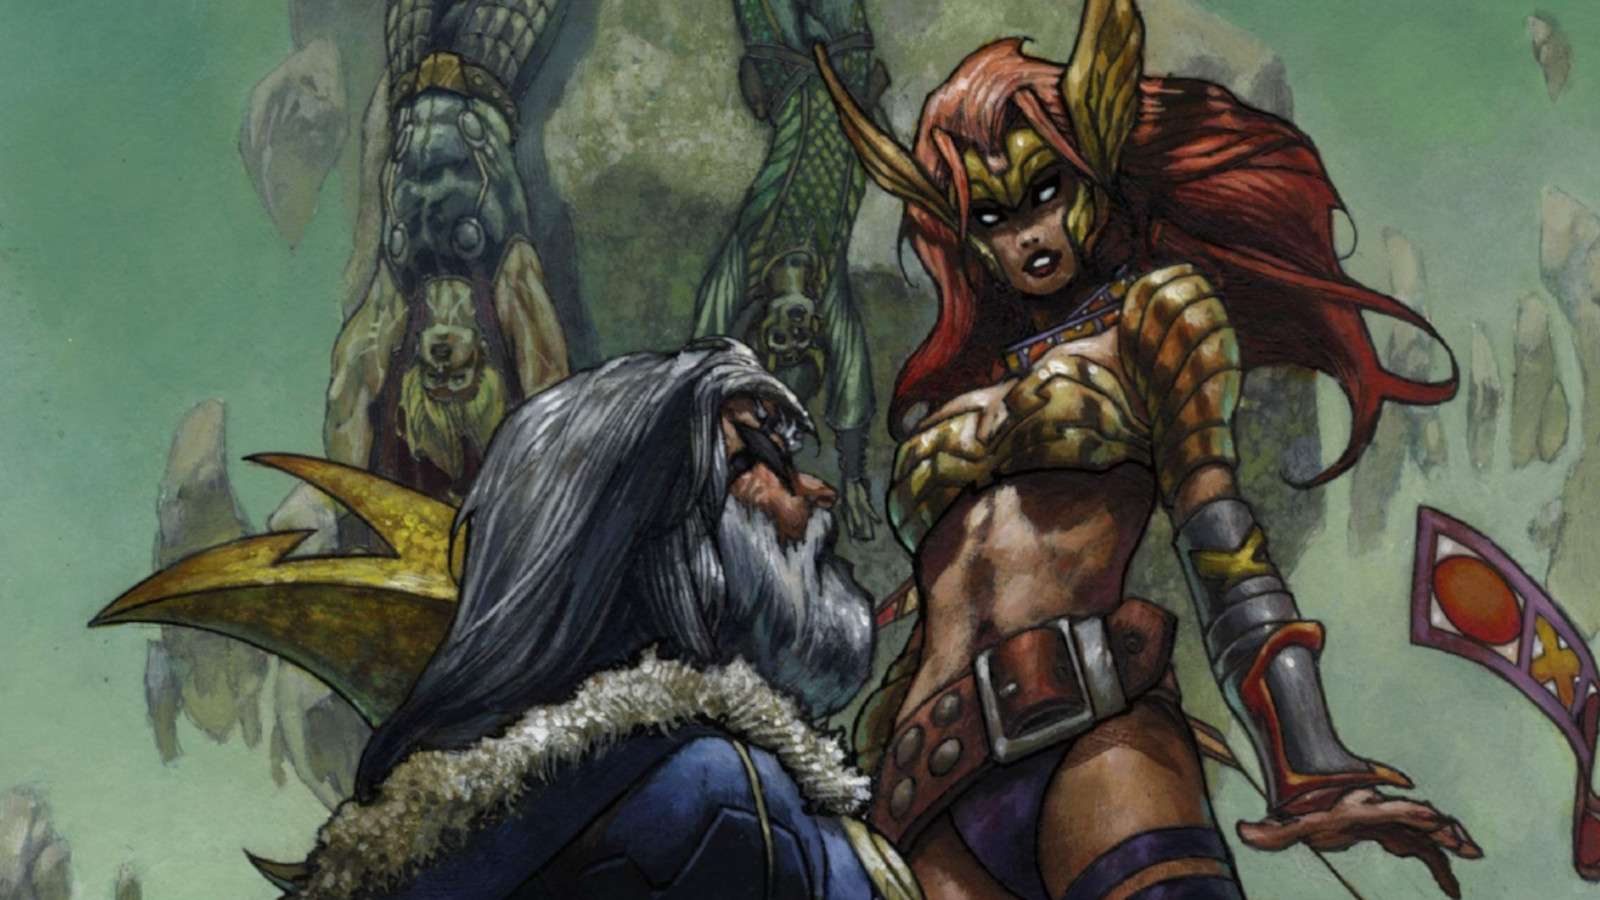 Angela faces off against Odin